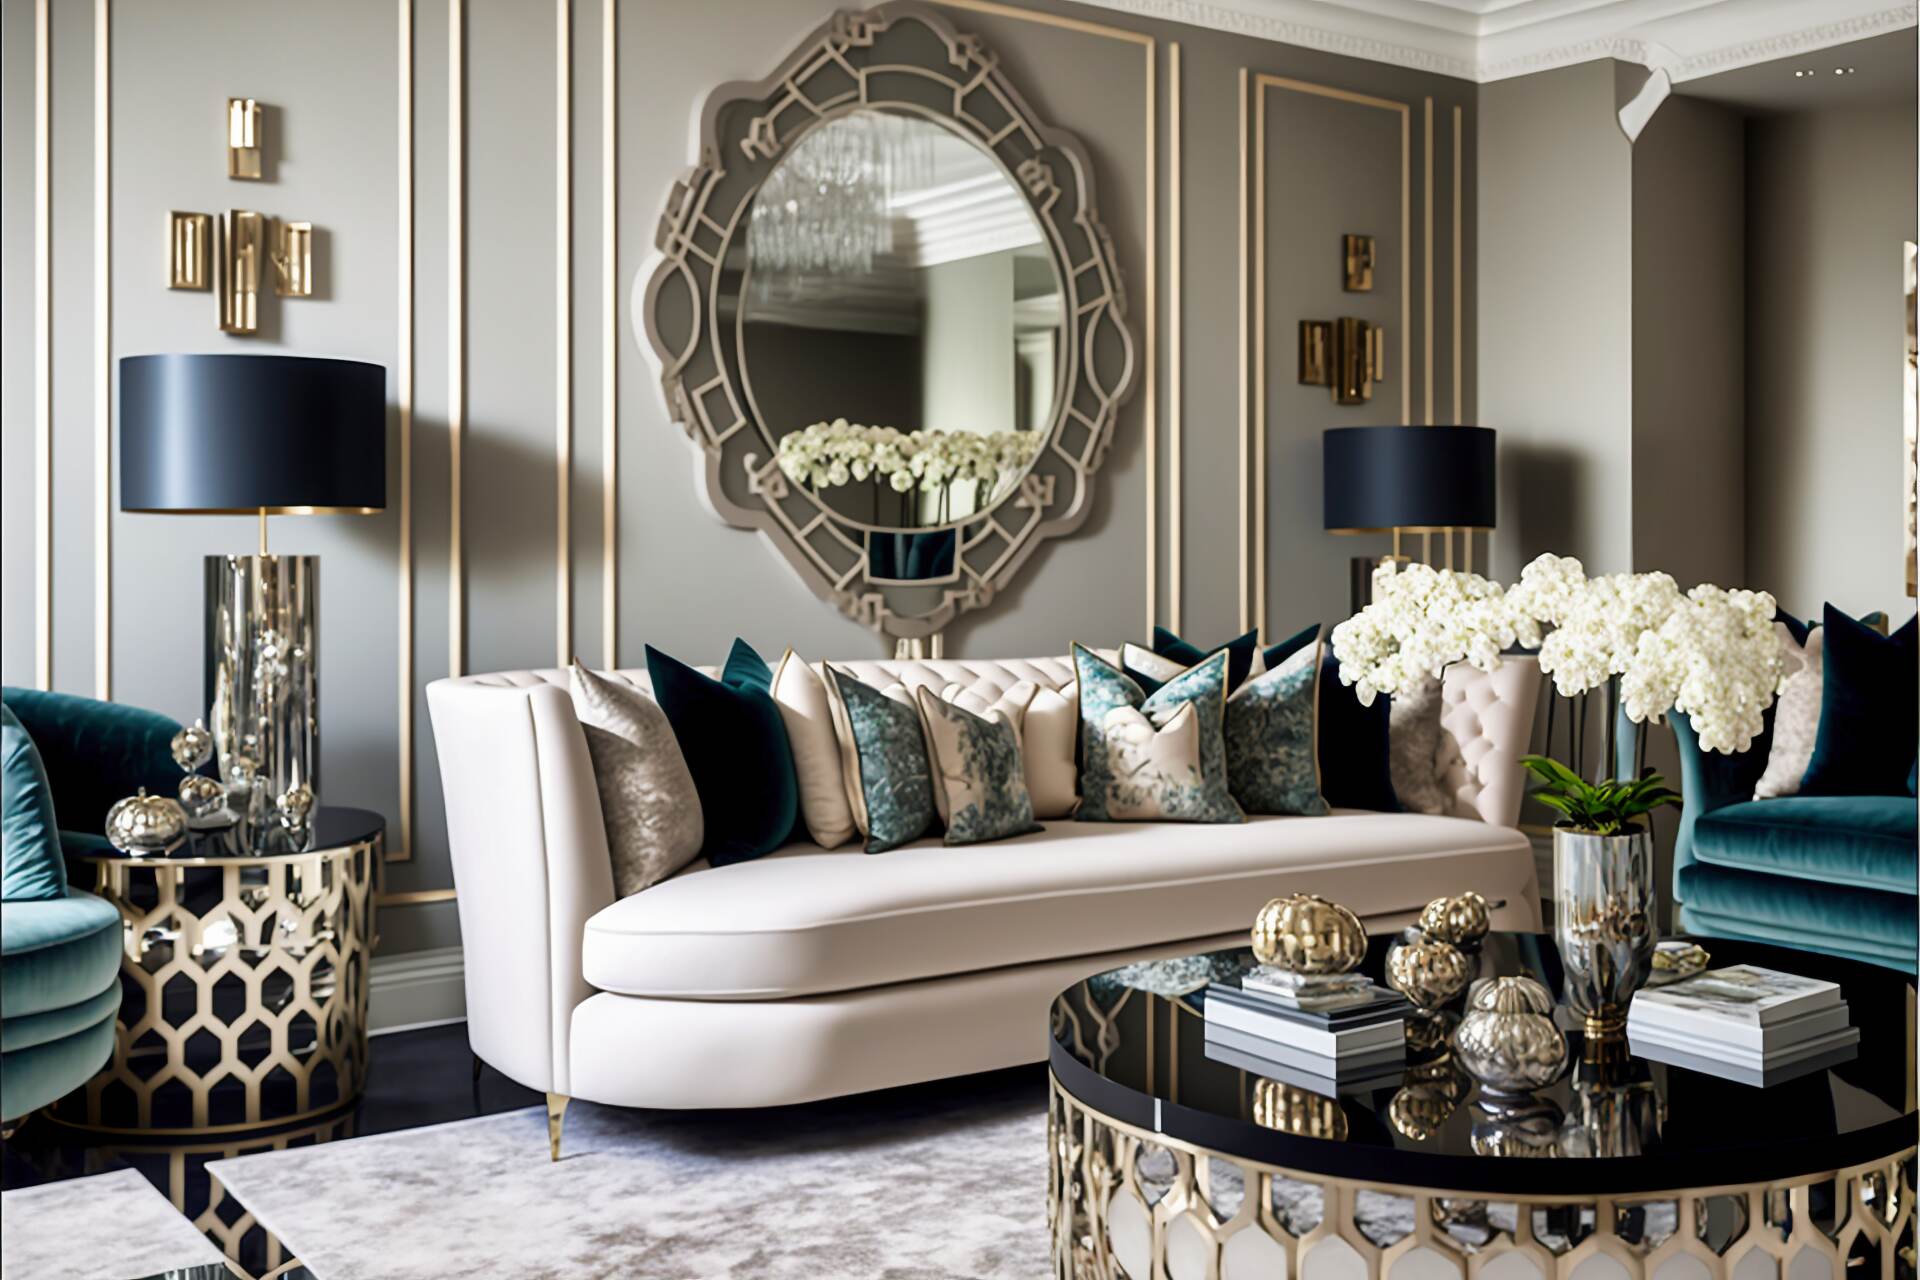 An Elaborate Art Deco Inspired Maximalist Living Room - An Incredible Blend Of Art Deco Style And Striking Maximalist Splendor Is Set Within This Luxurious Living Room. The Walls Are A Radiant Shade Of Dove Grey, The Perfect Canvas For Glimmering Mirrored Accents And Rounded Wall Scones. Set Atop The Marble-Pattern Carpet Lies An Expansive Cream Sofa With Ornately Patterned Cushions And Bolsters. An Extra Touch Of Lavishness Is Found In The Golden, Circular Coffee Table And The Larger Than Life Flat Screen Television Built Into The Wall. Every Inch Of This Magnificent Room Is As Majestic As It Is Unique.